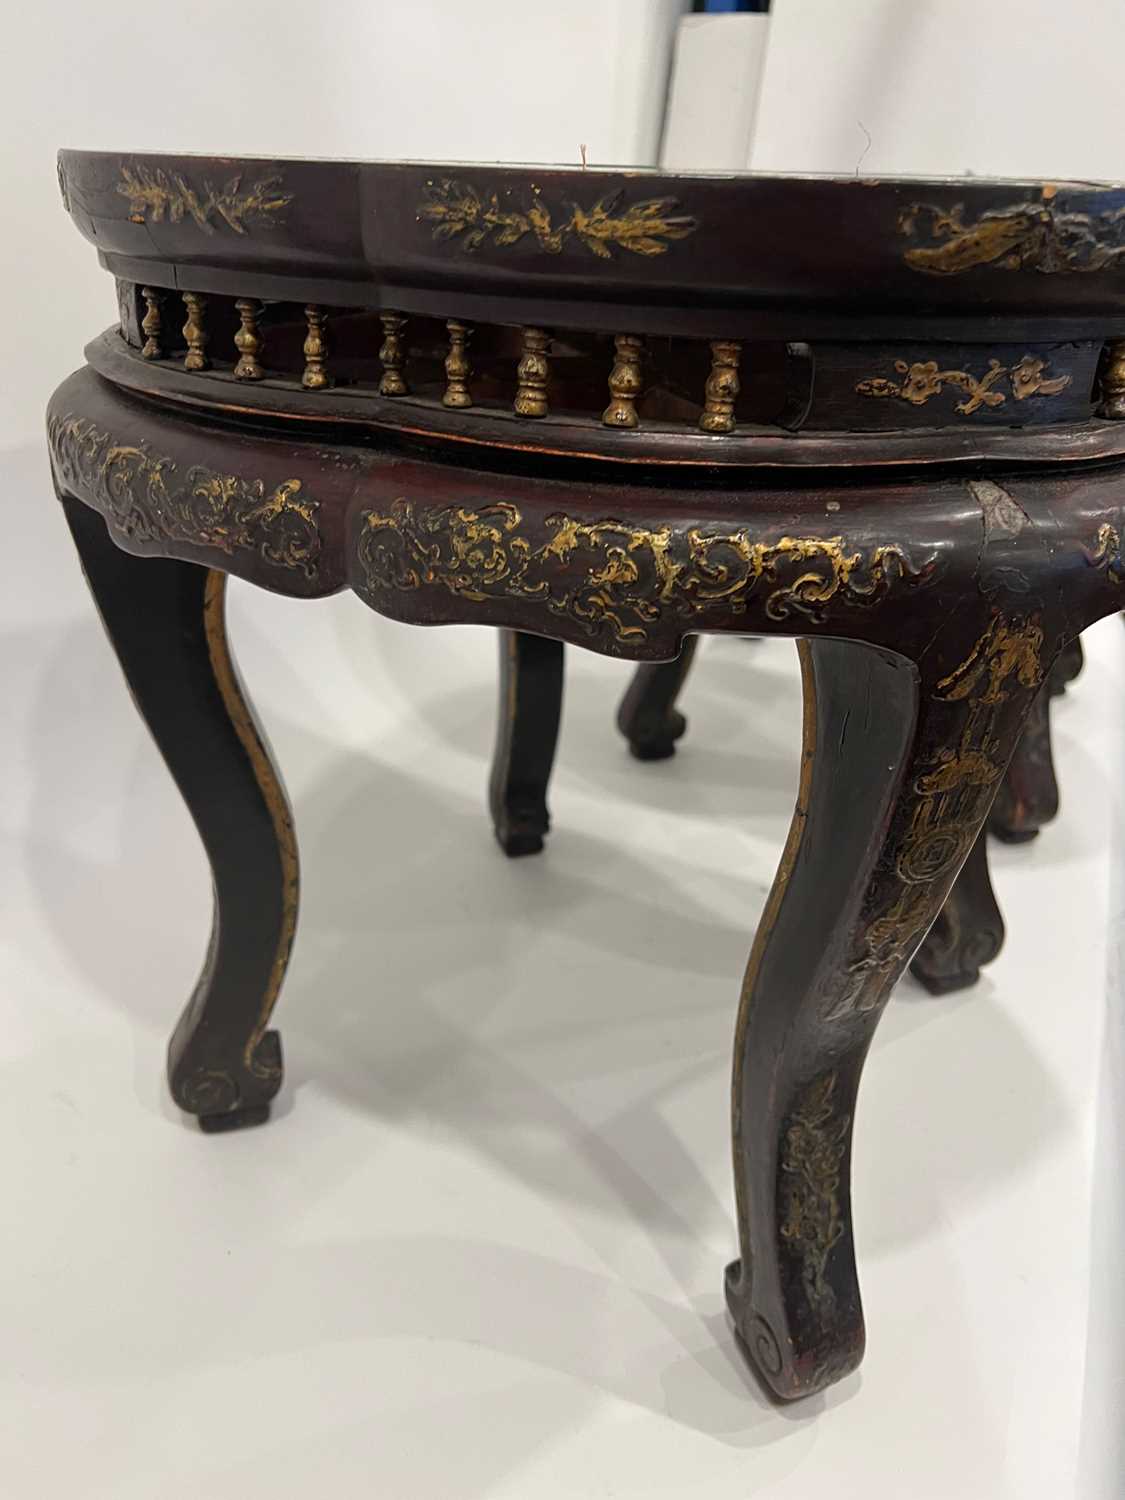 A PAIR OF 19TH CENTURY CHINESE CARVED HARDWOOD AND PARCEL GILT DECORATED STANDS - Image 3 of 5